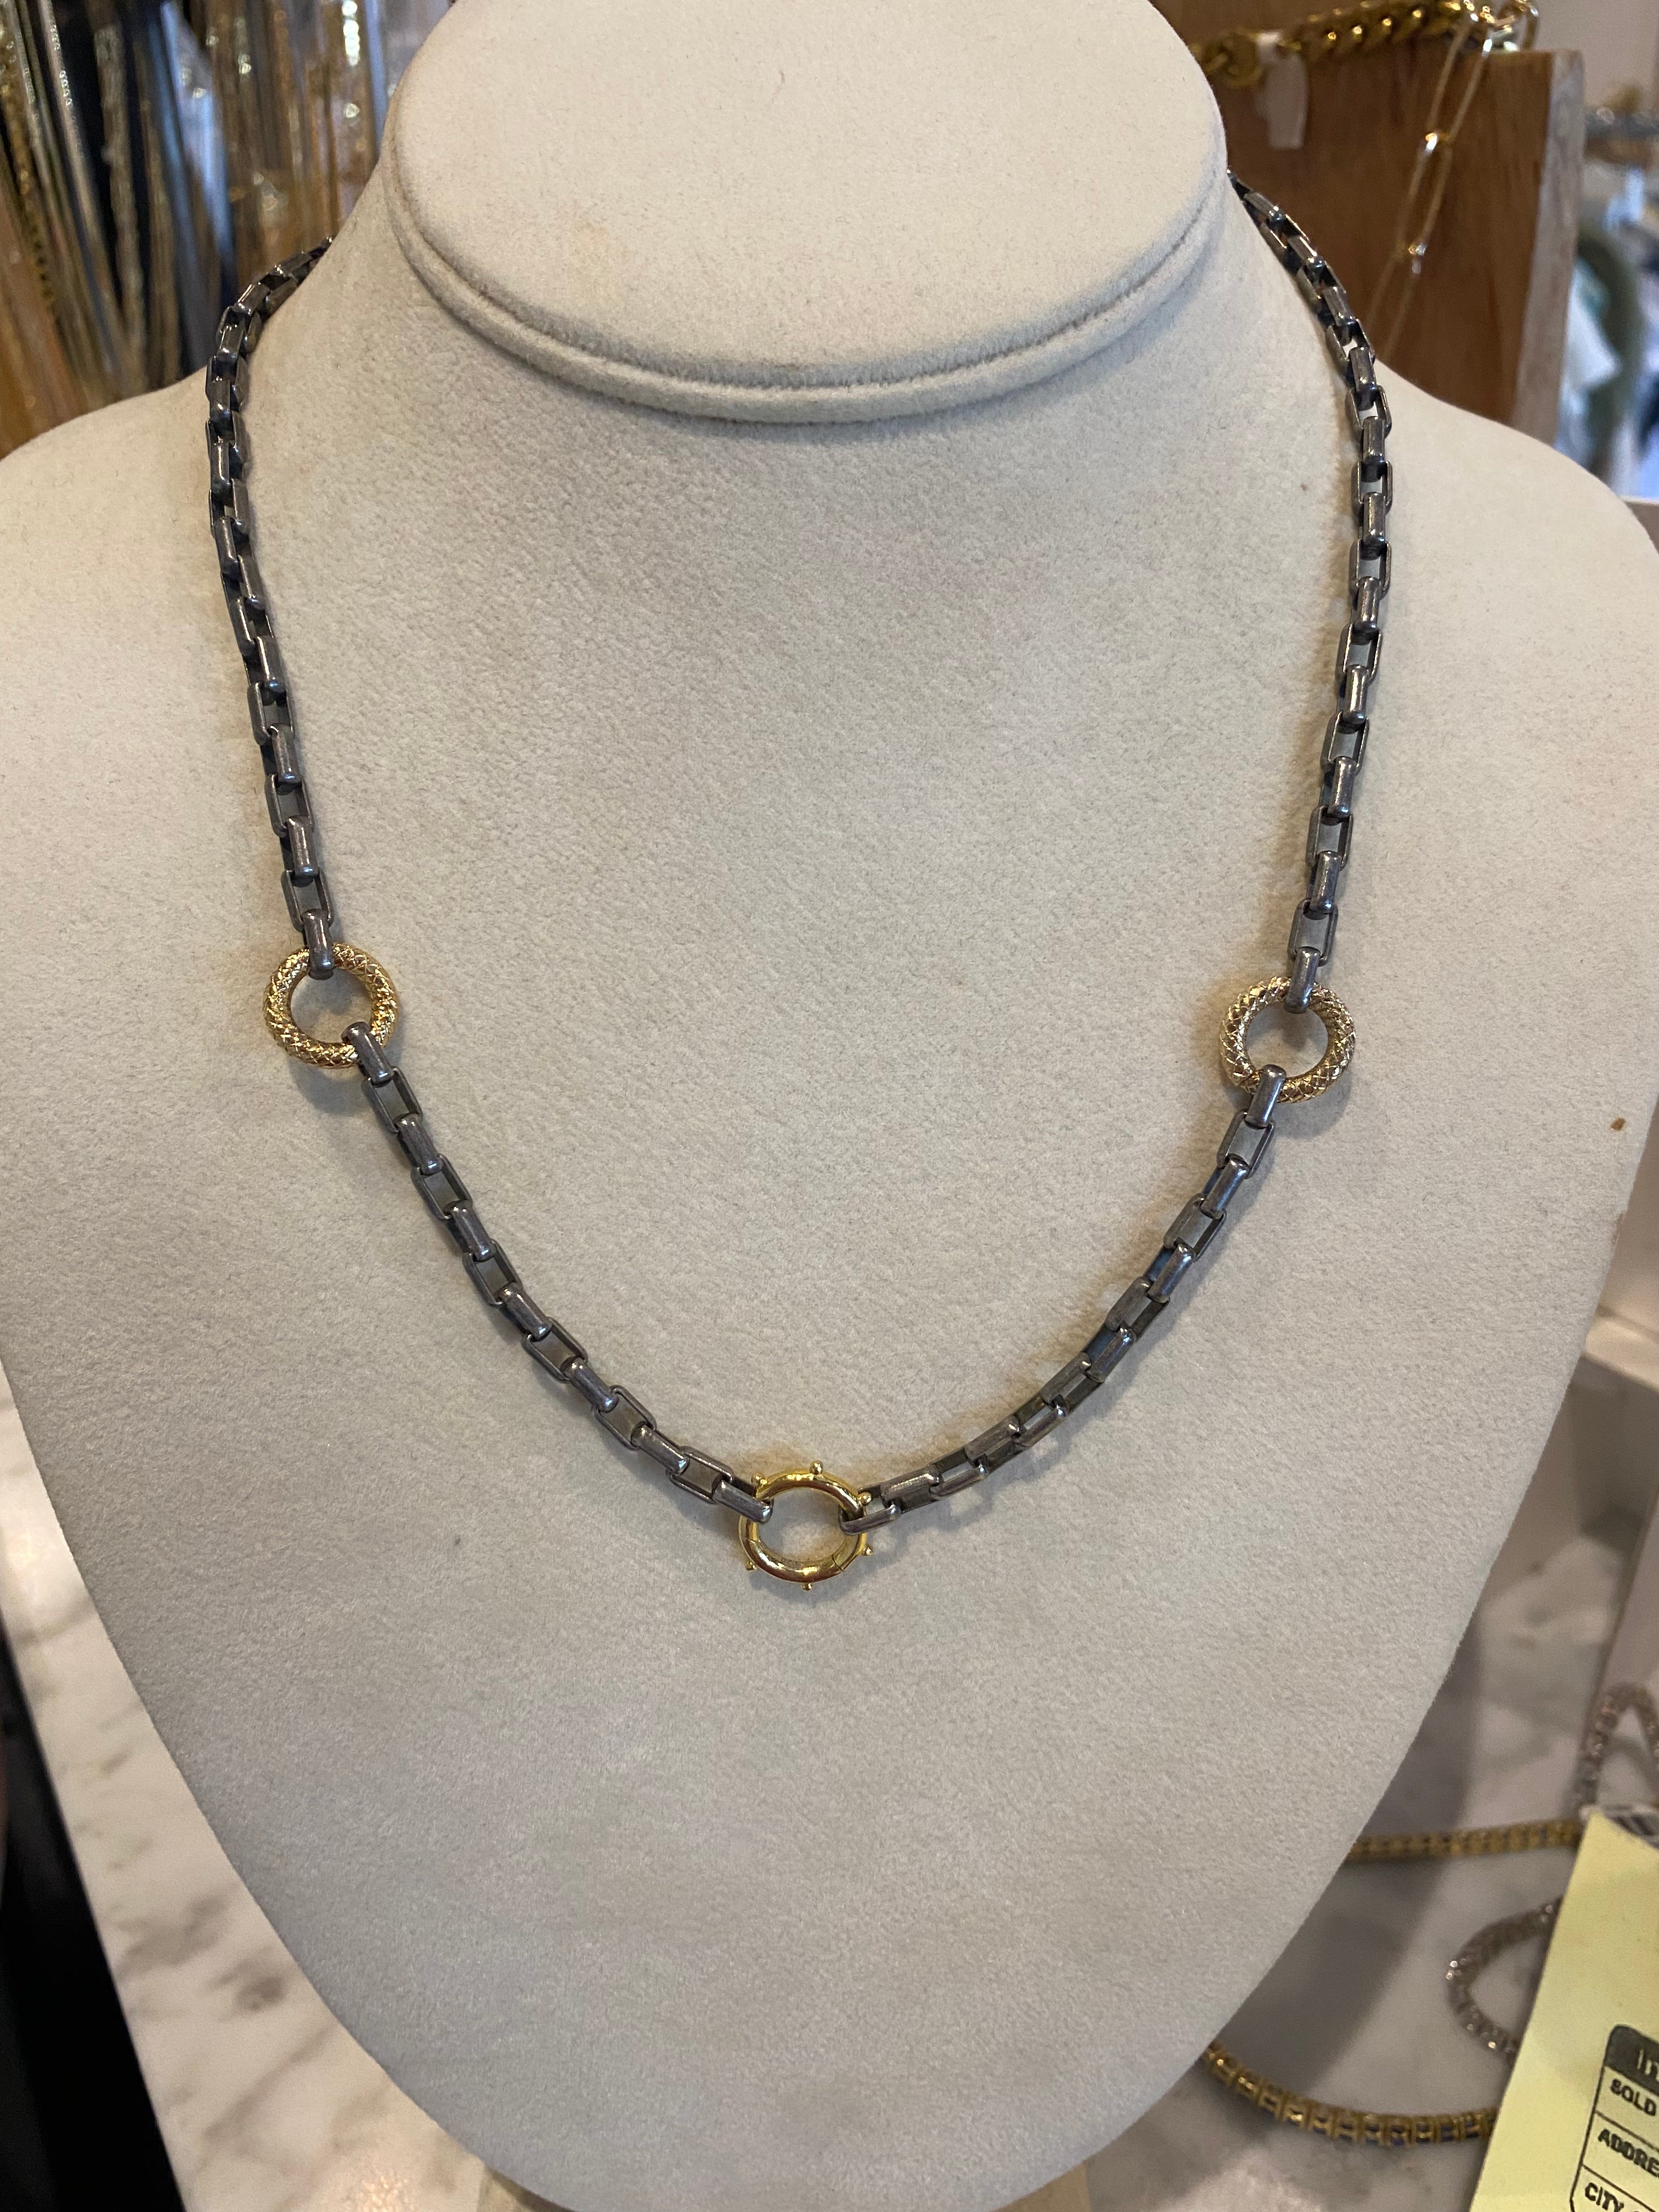 Paula Rosen Boxy Chain With Gold Rings